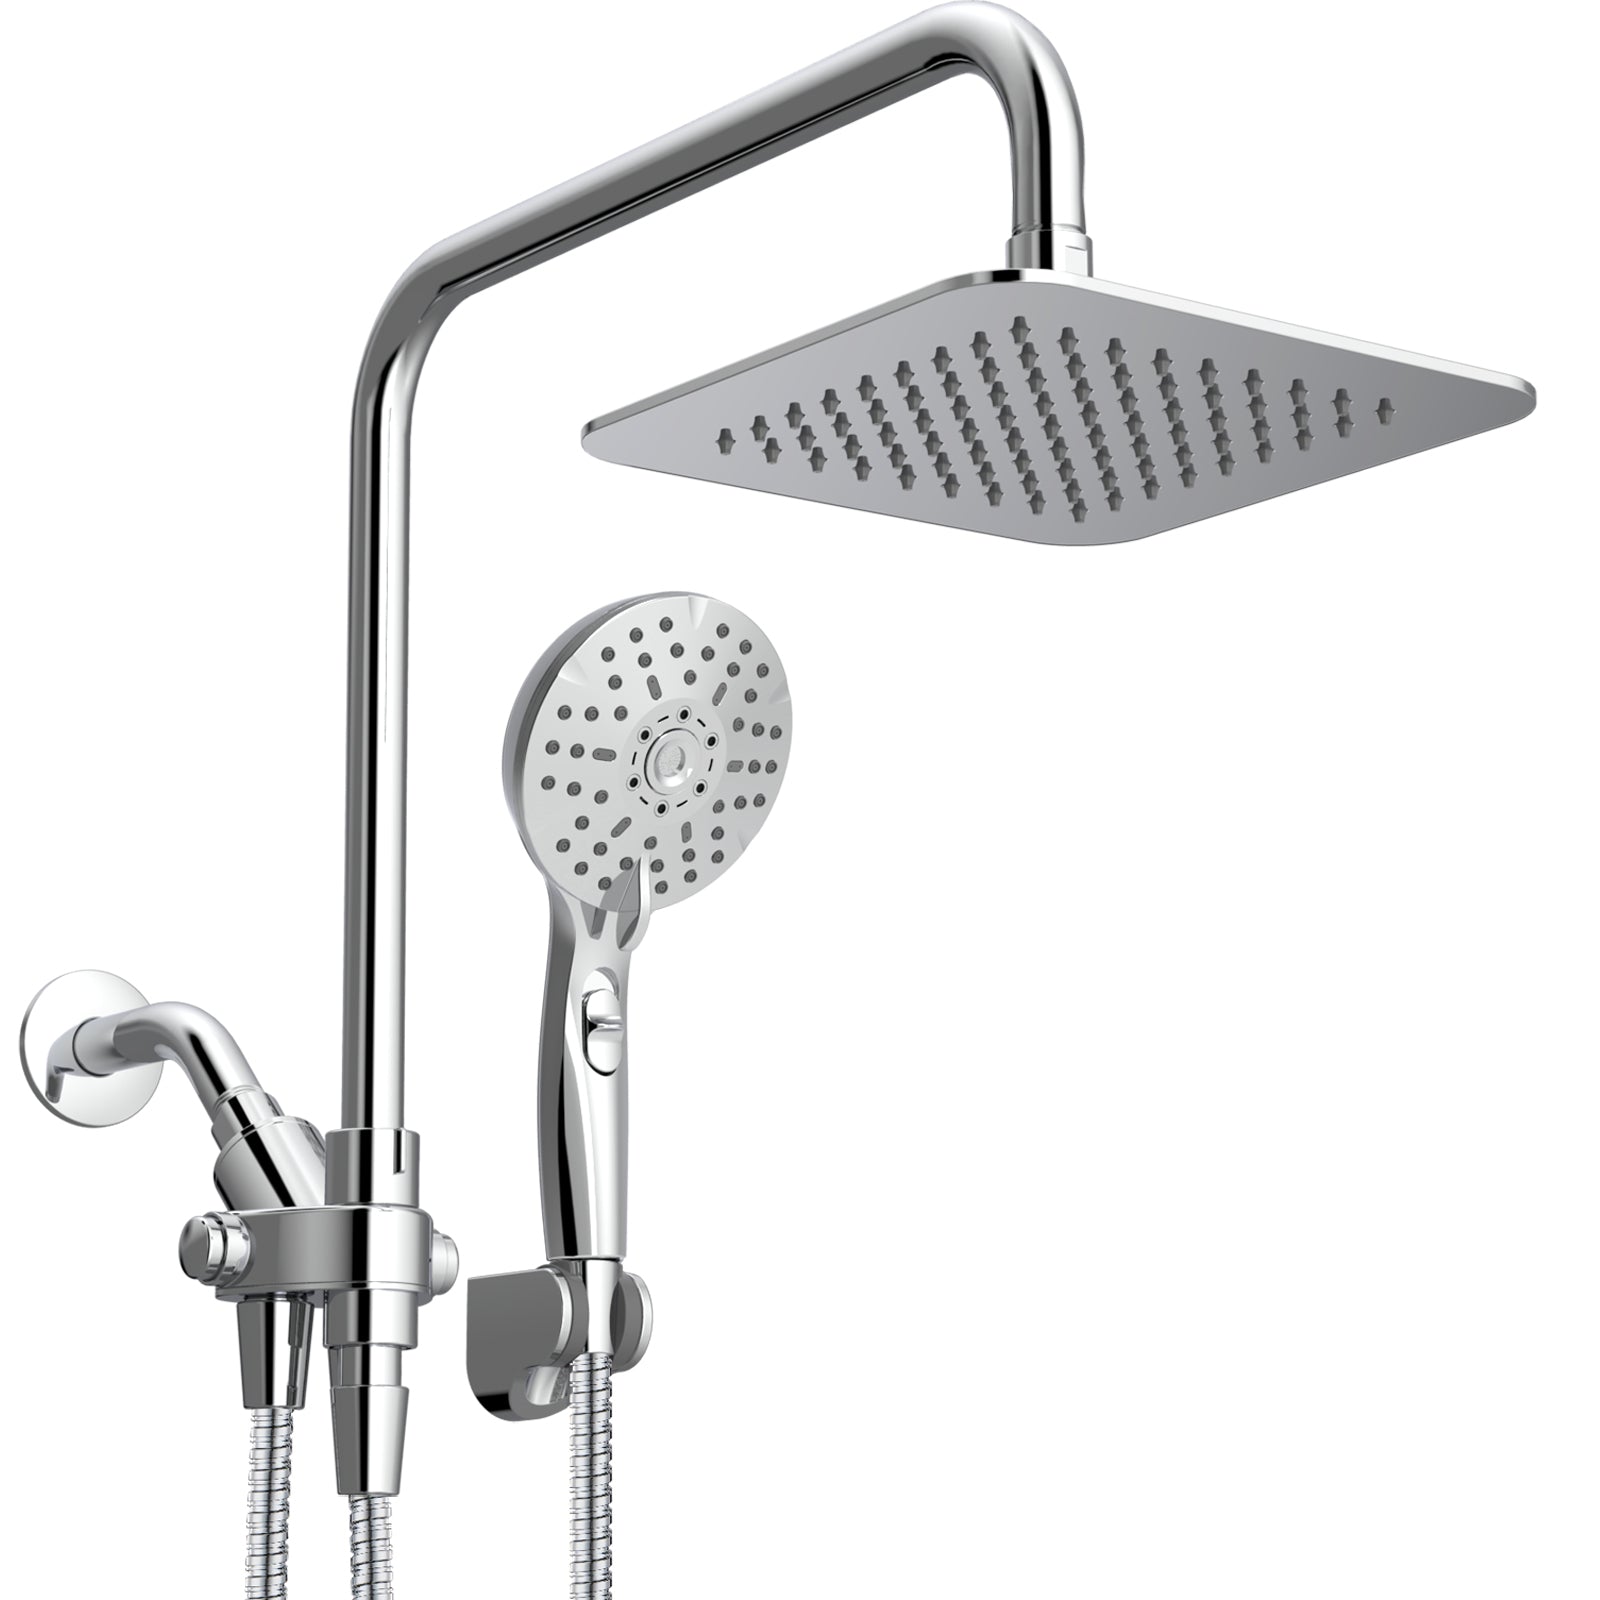 Review and Installation of an Adjustable Shower Head/Wand Holder